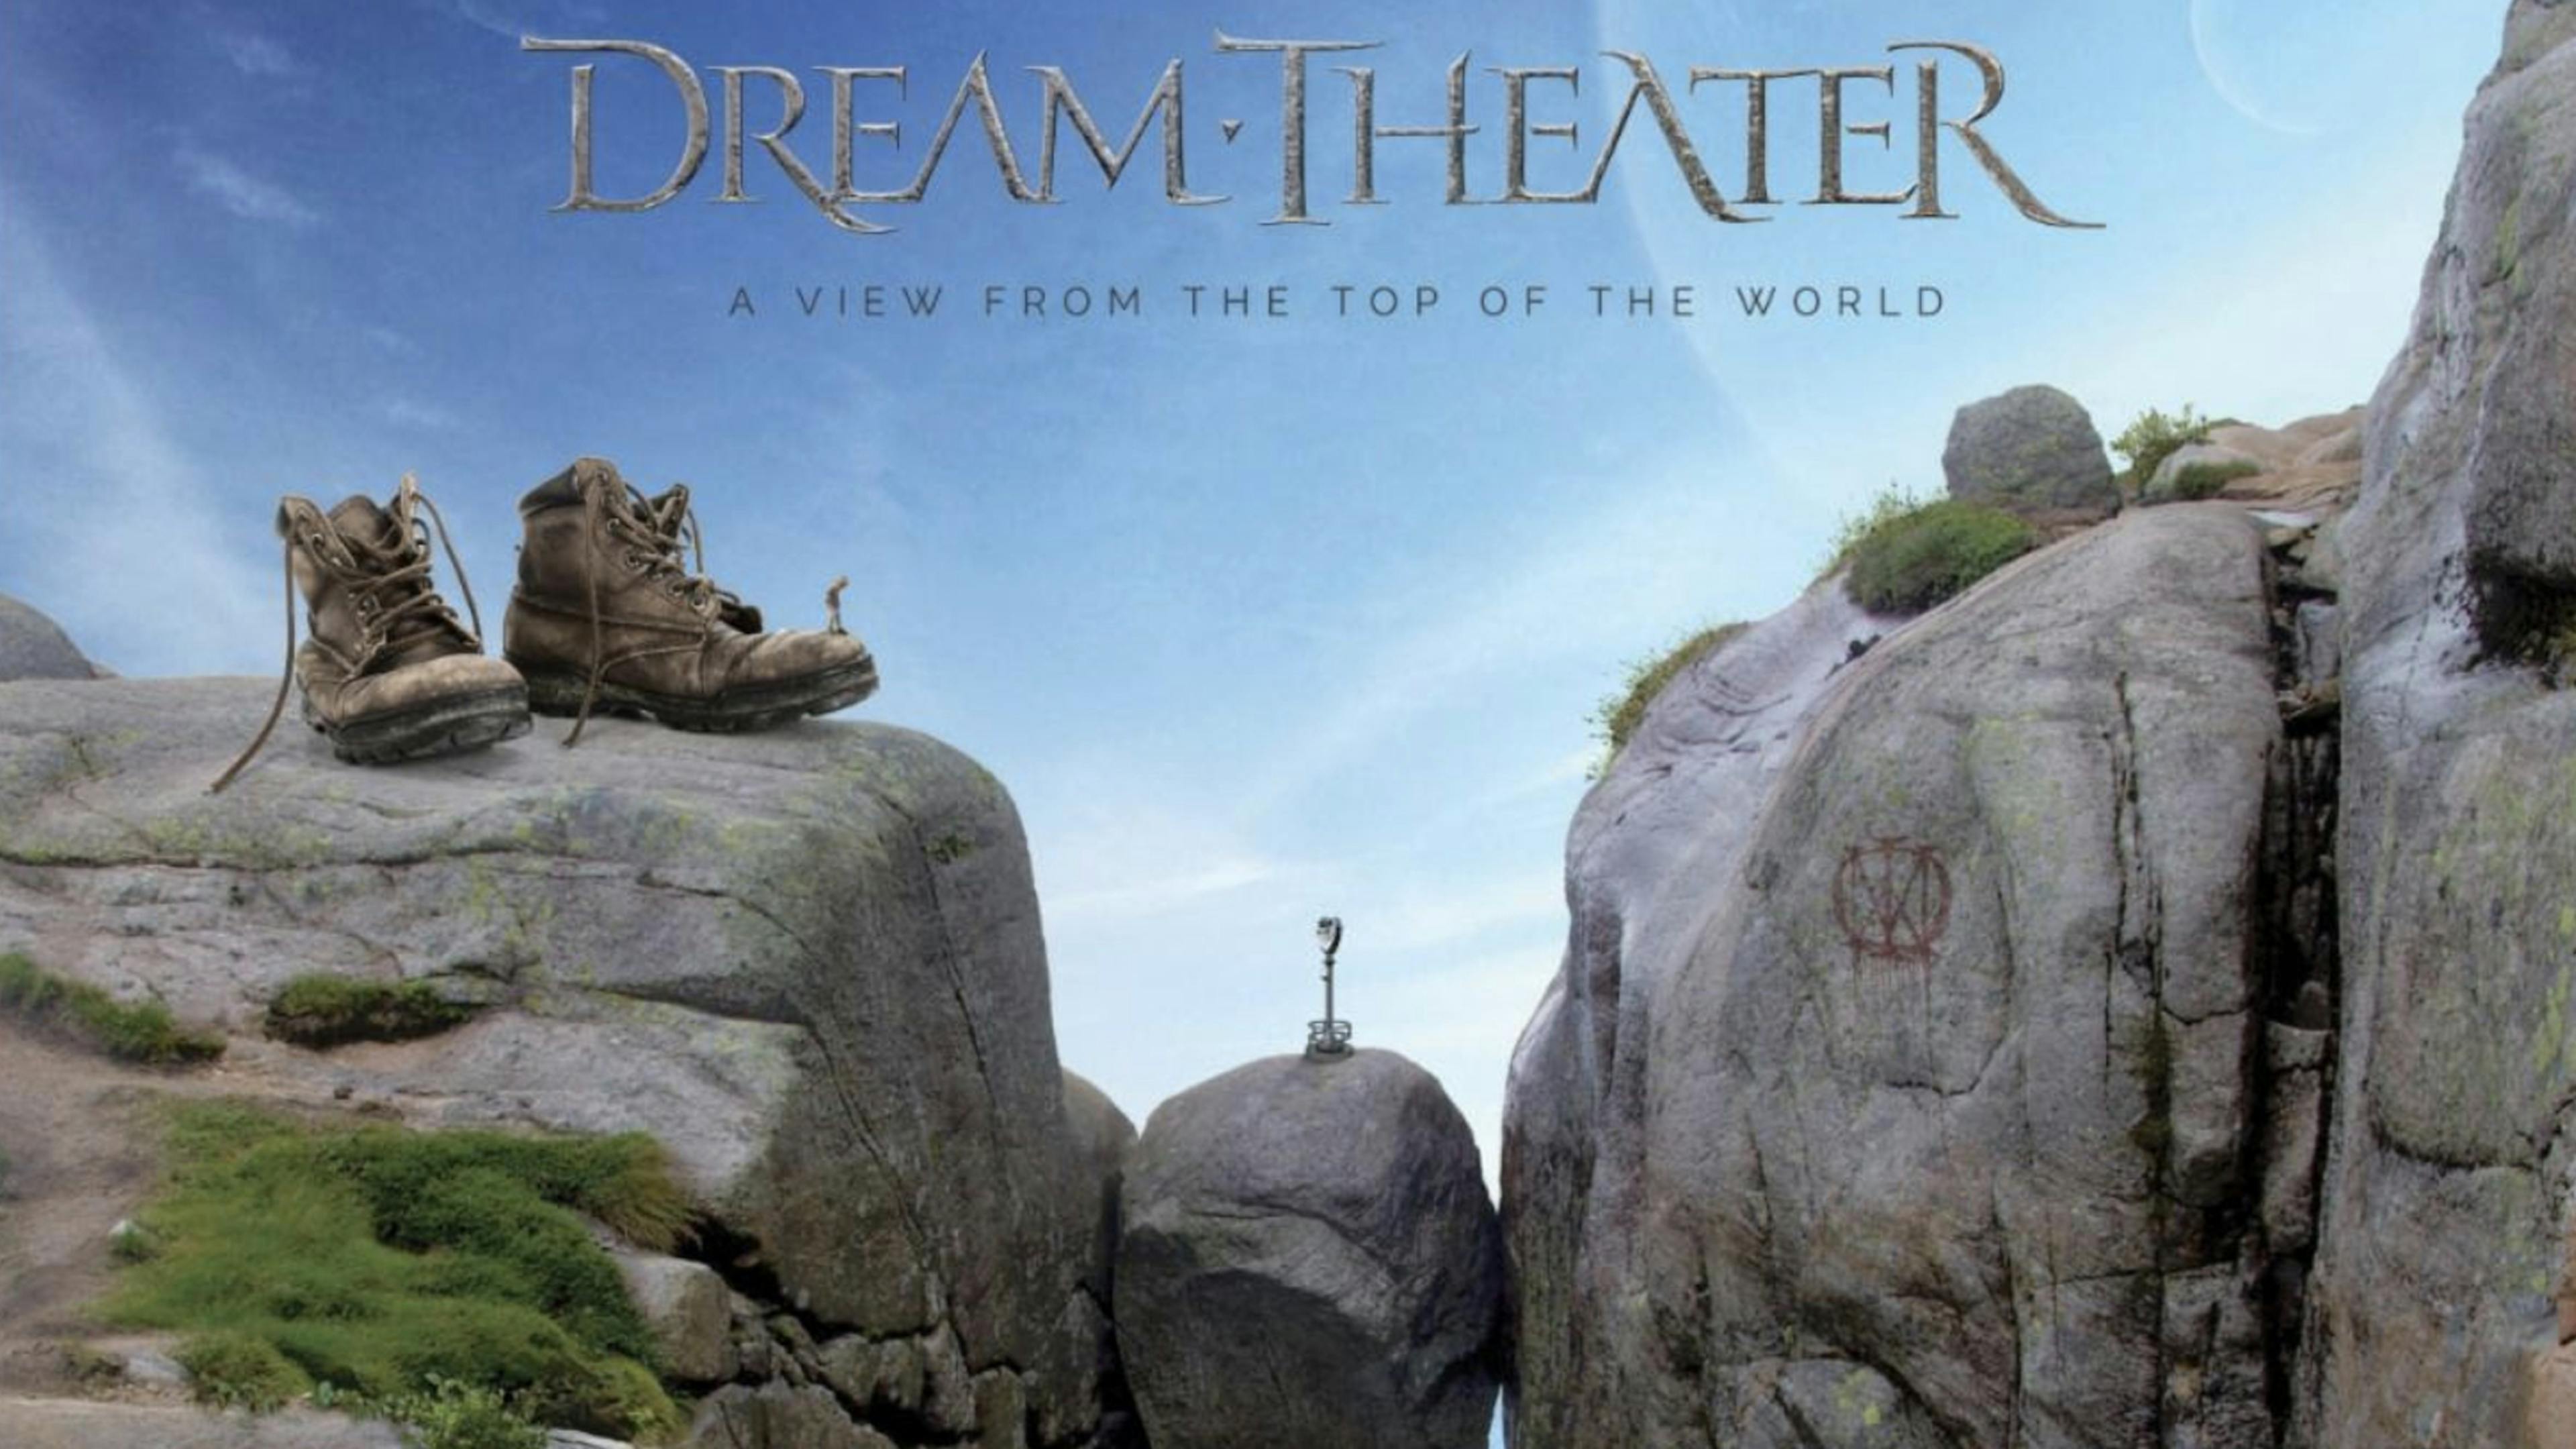 Dream Theater announce 15th studio album, A View From The Top Of The World